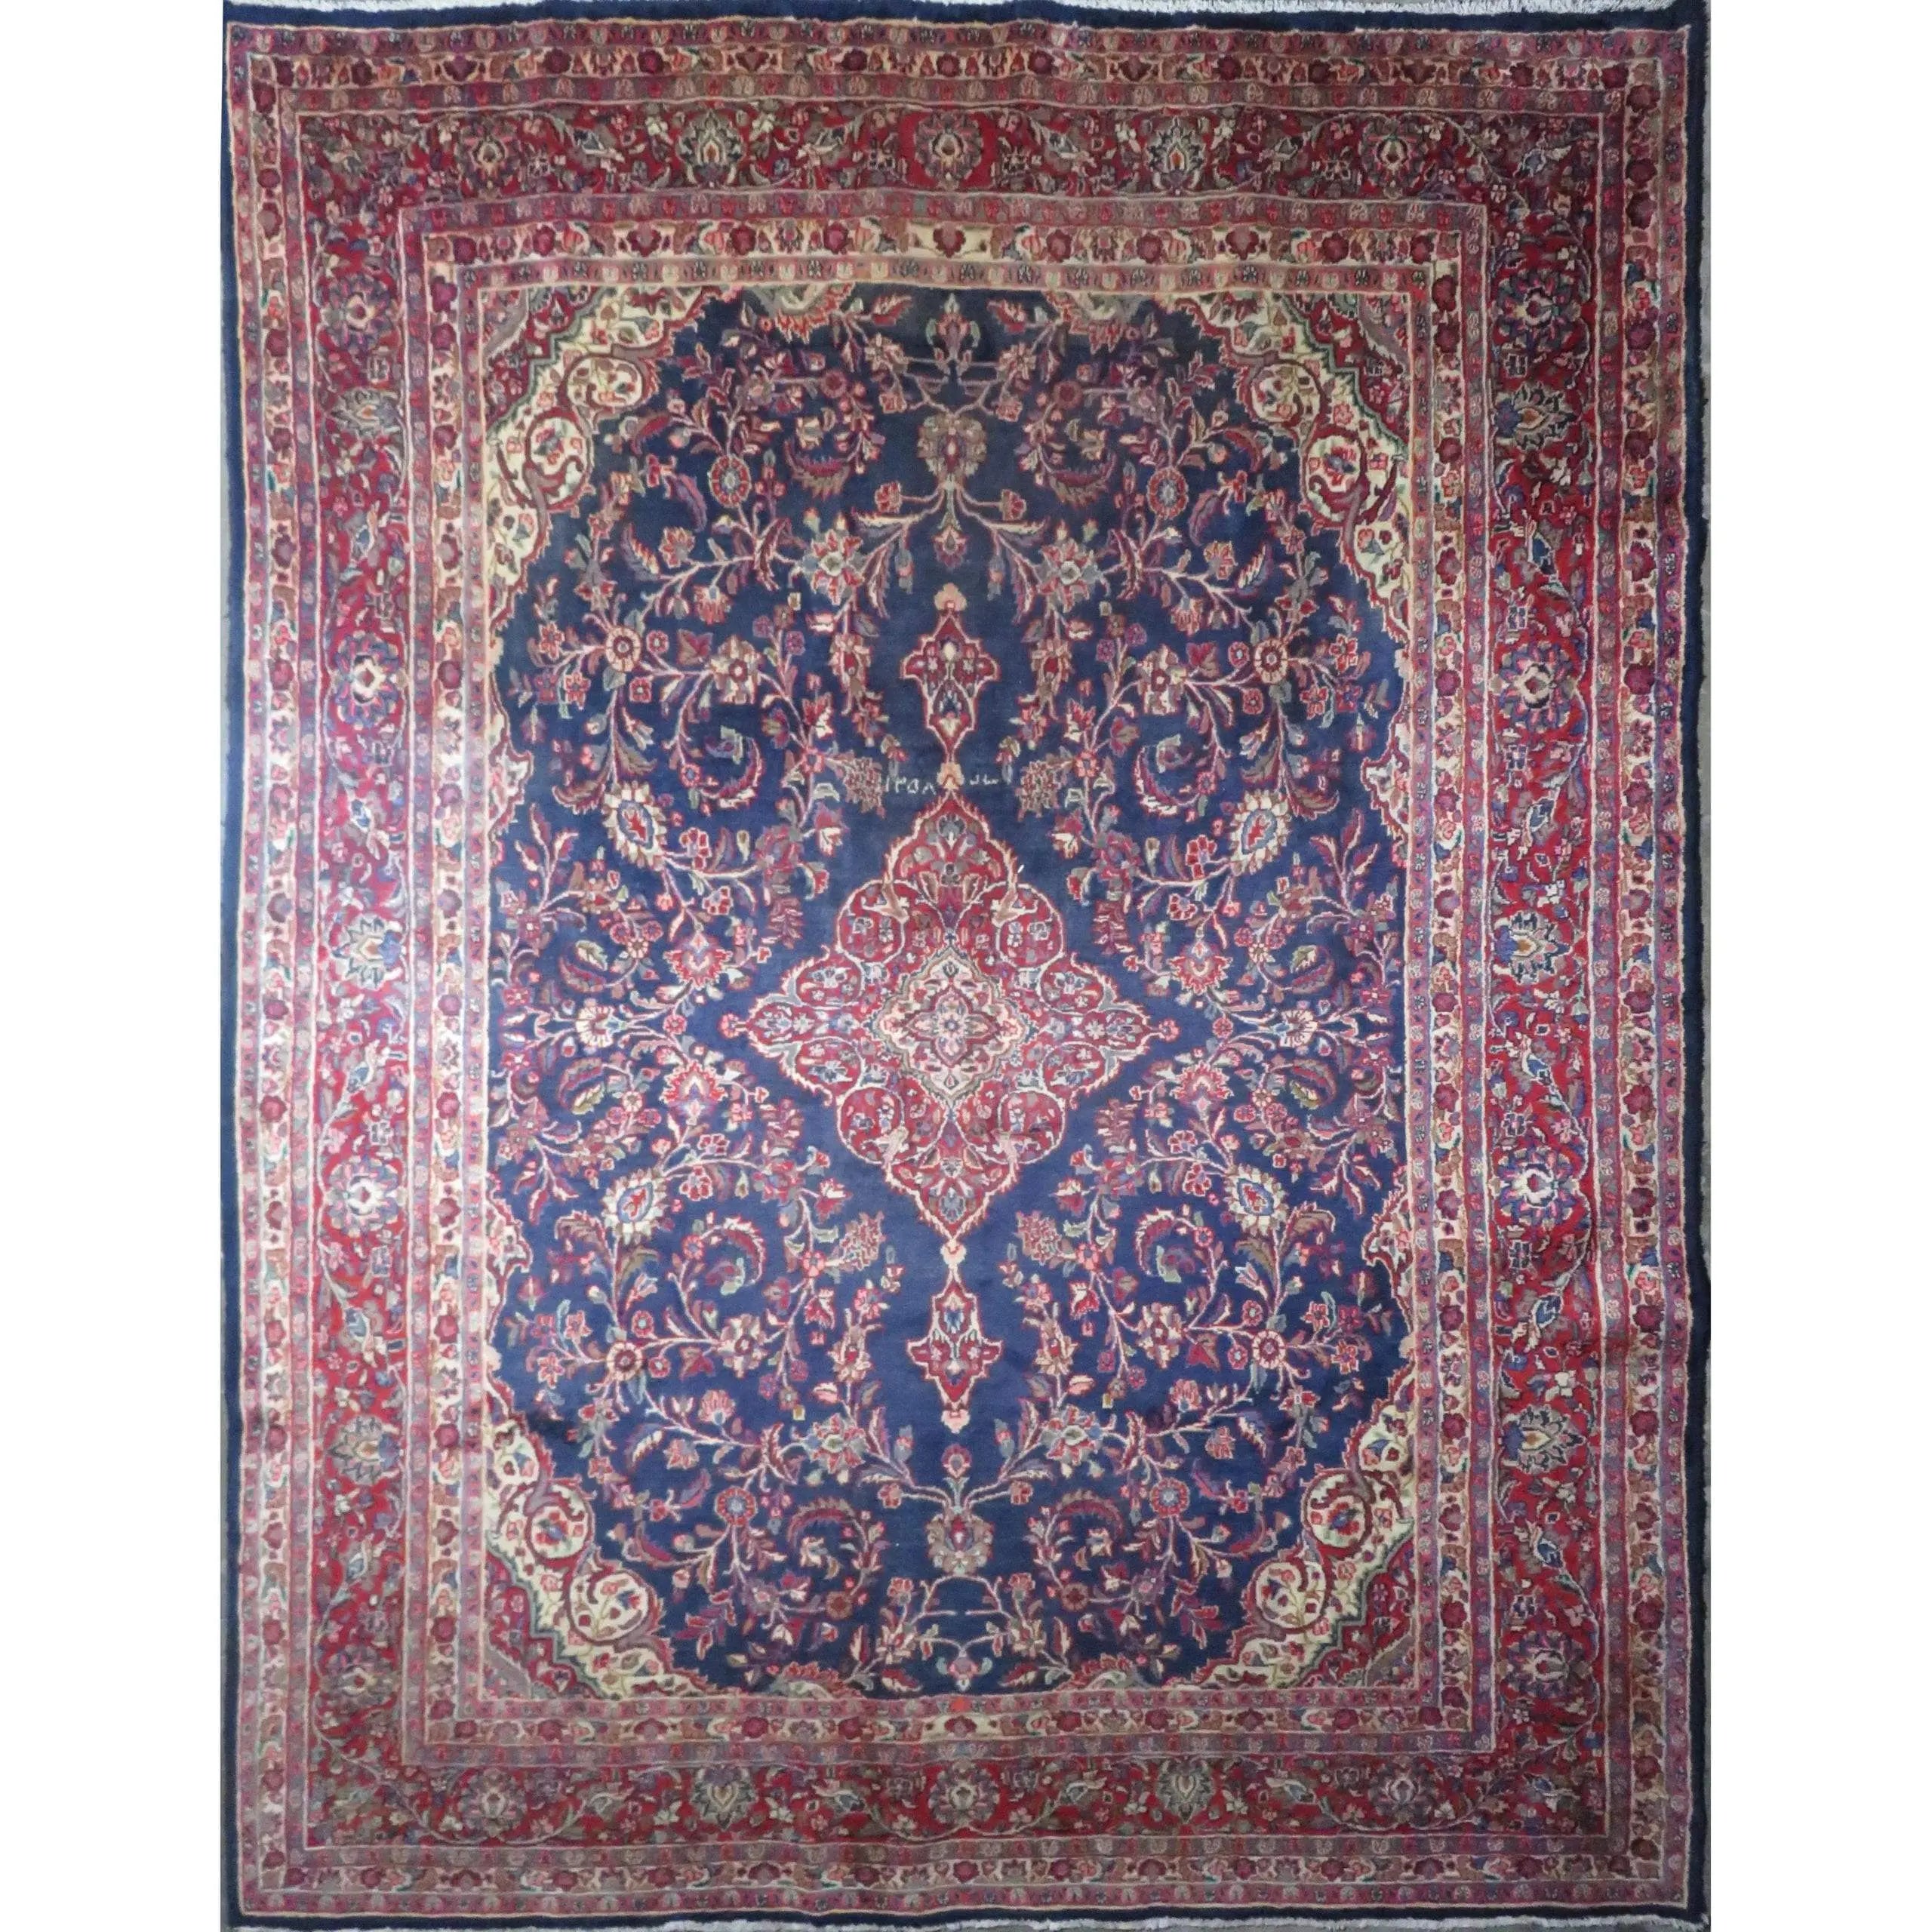 Hand-Knotted Persian Wool Rug _ Luxurious Vintage Design, 13'3" x 9'9", Artisan Crafted